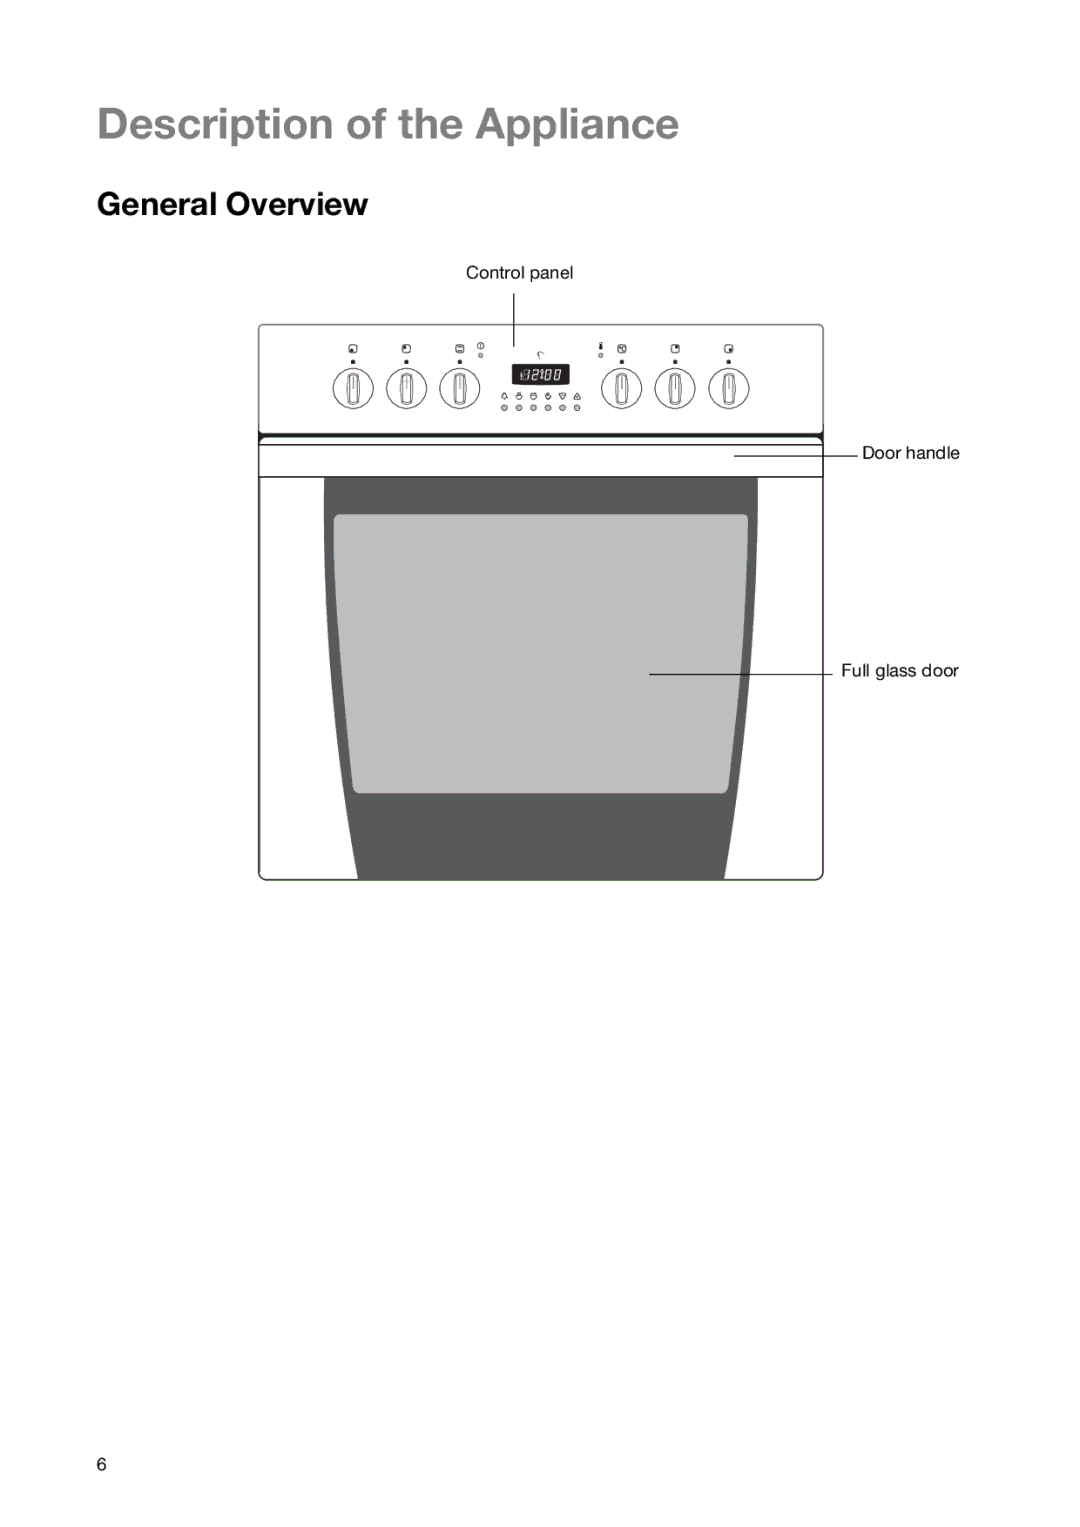 Electrolux EON 6640 manual Description of the Appliance, General Overview 